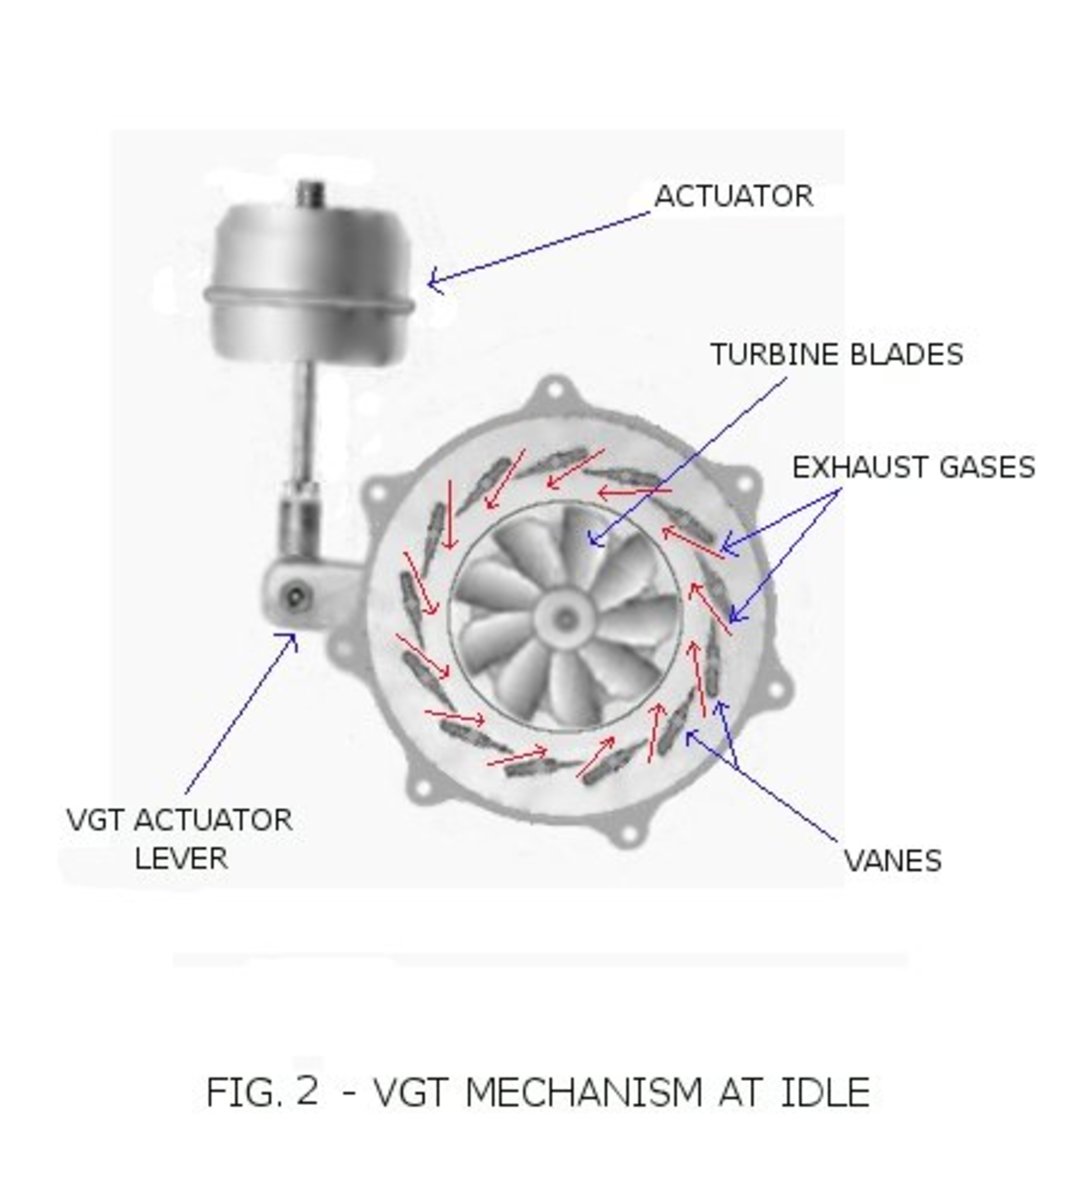 turbocharged-diesel-engine-lacks-power-due-to-stuck-vgt-mechanism